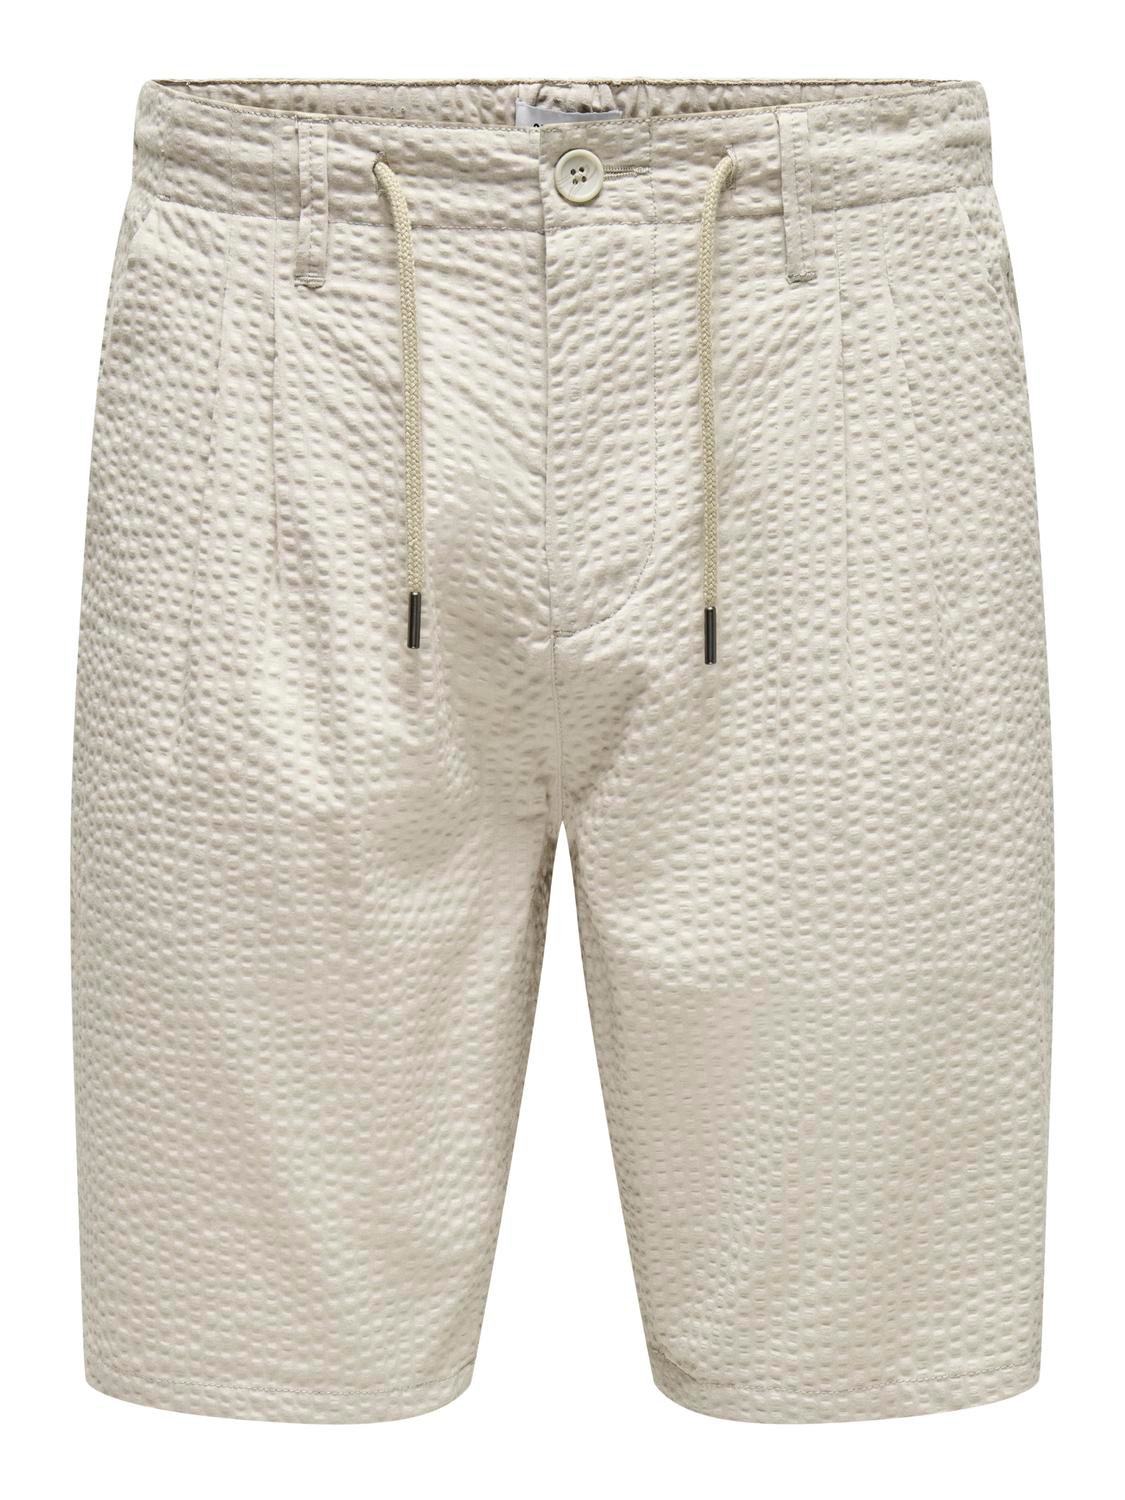 ONLY & SONS Normal geschnitten Shorts -Silver Lining - 22028301